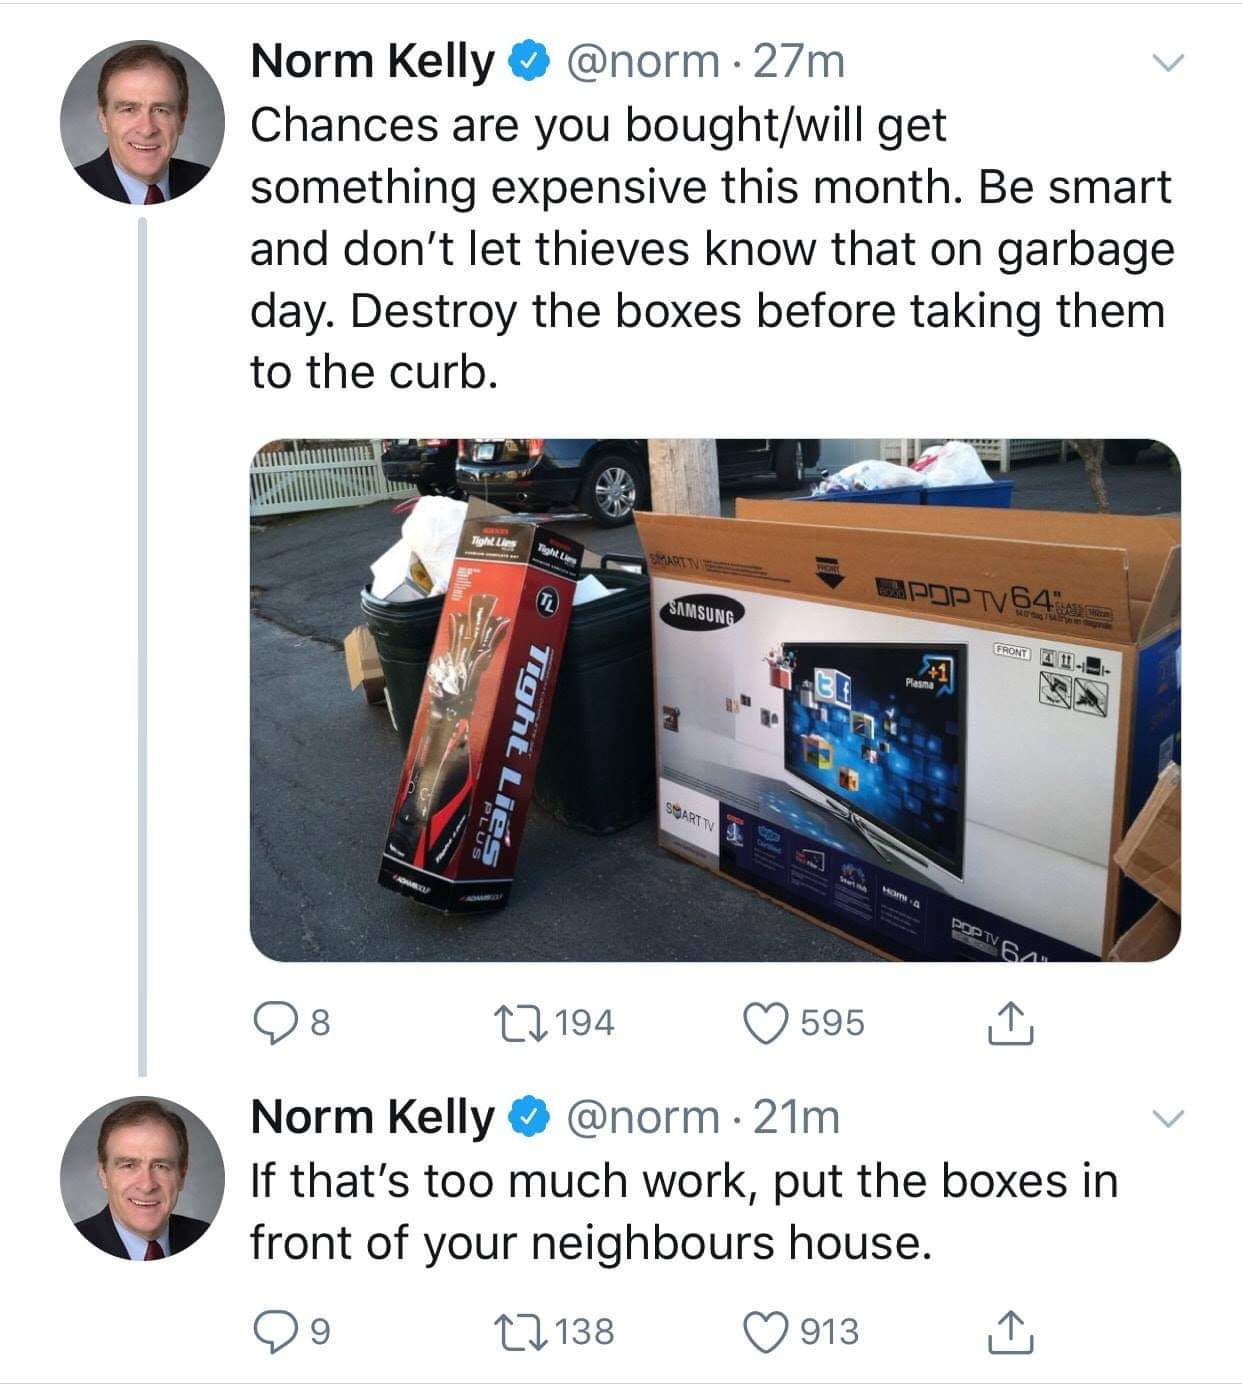 multimedia - Norm Kelly 27m Chances are you boughtwill get something expensive this month. Be smart and don't let thieves know that on garbage day. Destroy the boxes before taking them to the curb. Mount Tight Tight. Les HAPOPTV64 me Samsung Front 4 Plasm